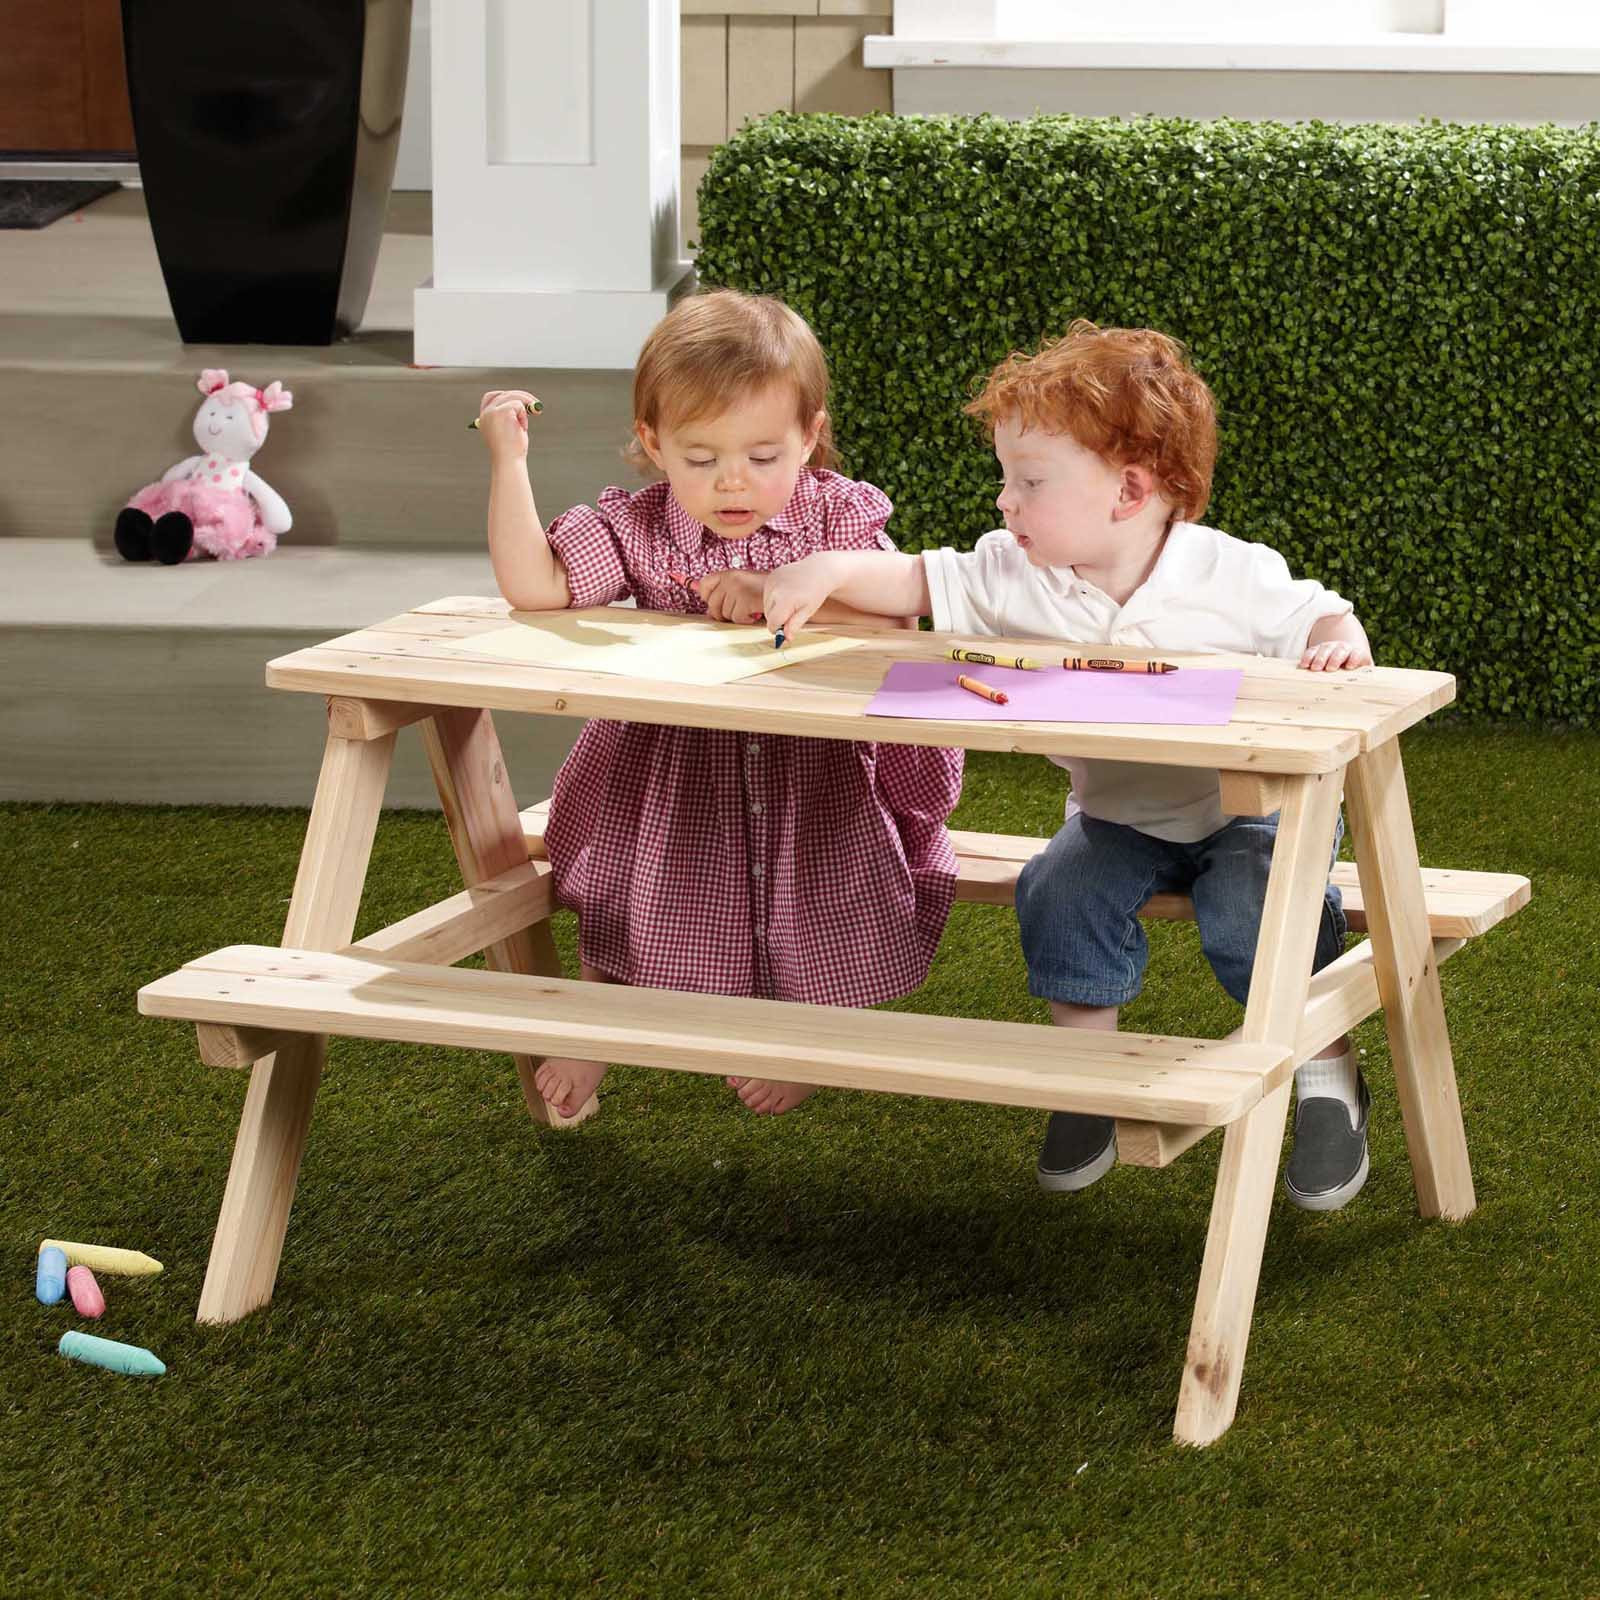 Kids Wooden Picnic Table
 Northbeam Kids Wooden Picnic Table Walmart